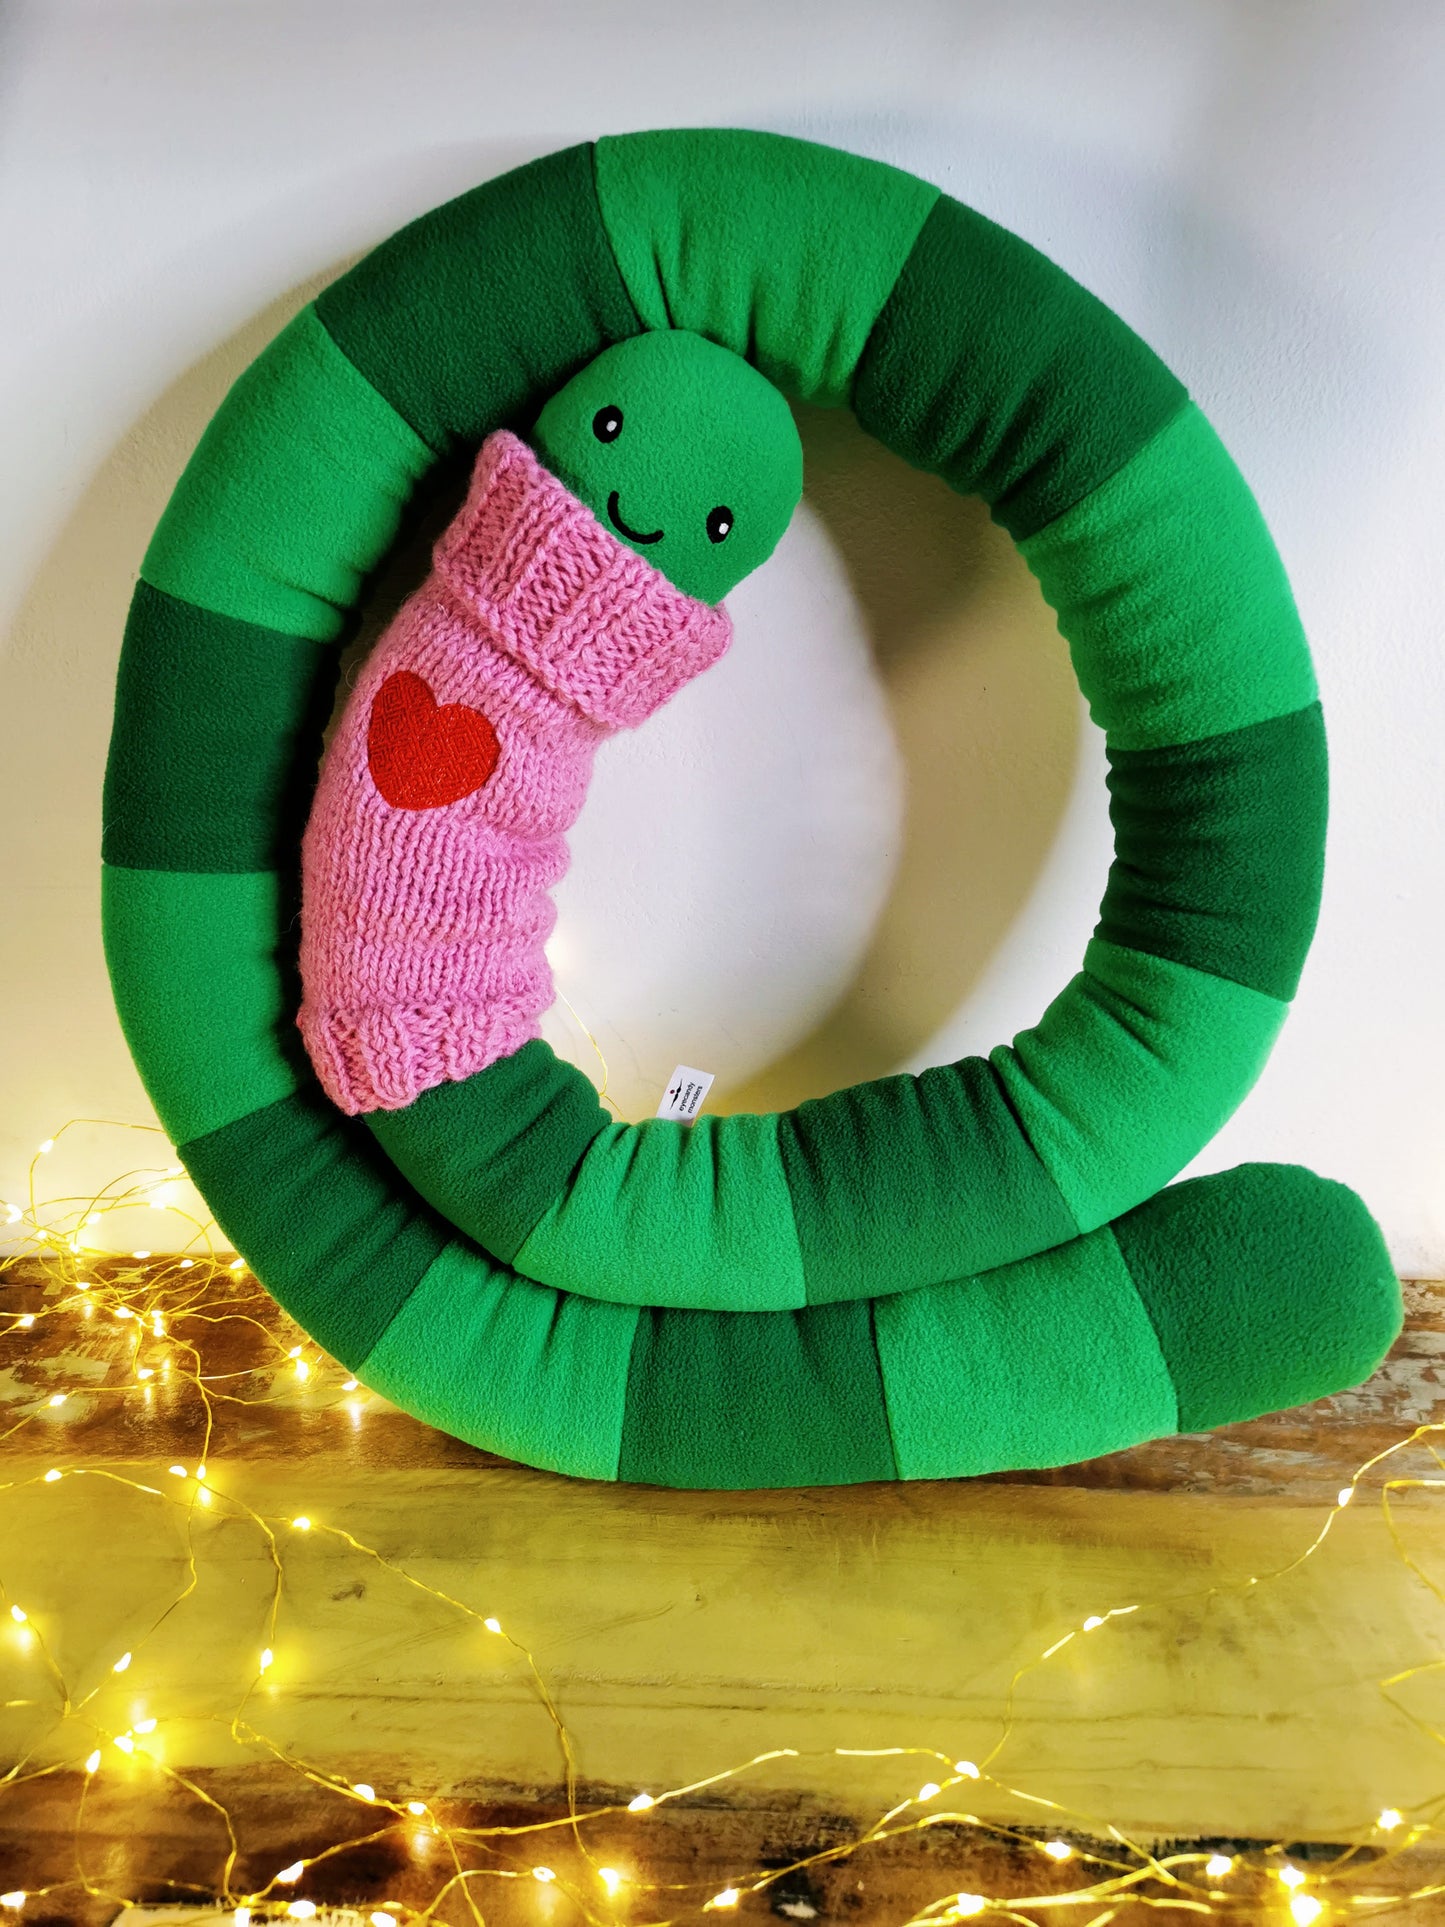 Giant Worm Plush dressed in knitted sweater, Plush Book Worm, 200cm, READY TO DELIVER!